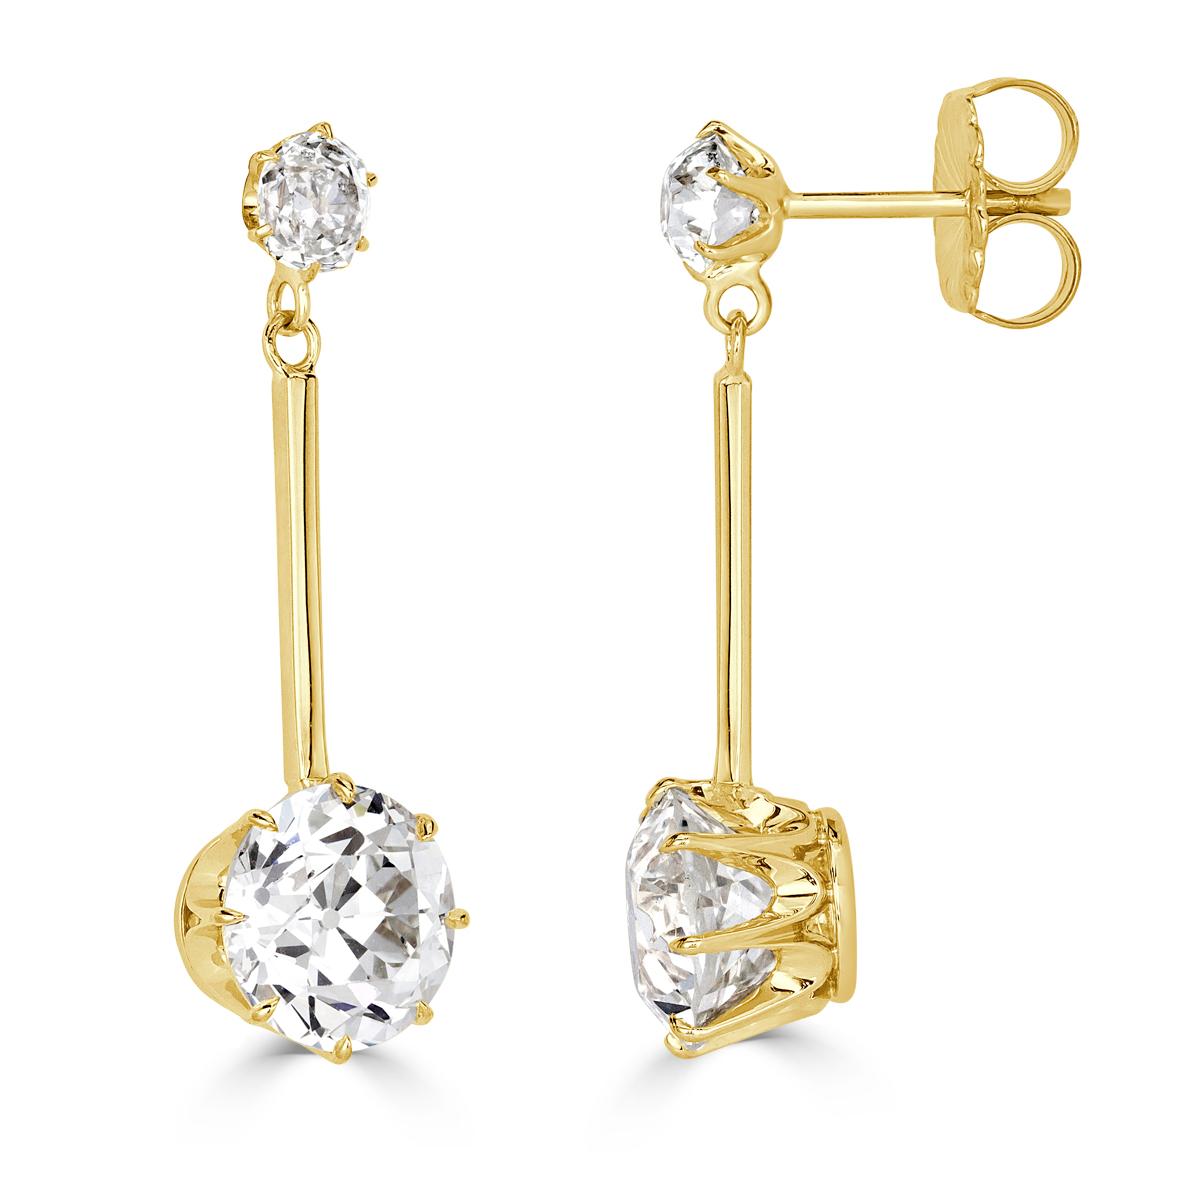 These gorgeous estate diamond dangle earrings features two superb old European cut diamonds with a respective weight of 4.41ct and 4.74ct. They are GIA certified at J-VS1 and J-VS2 and set in an eight-prong setting crafted in 18k yellow gold. The